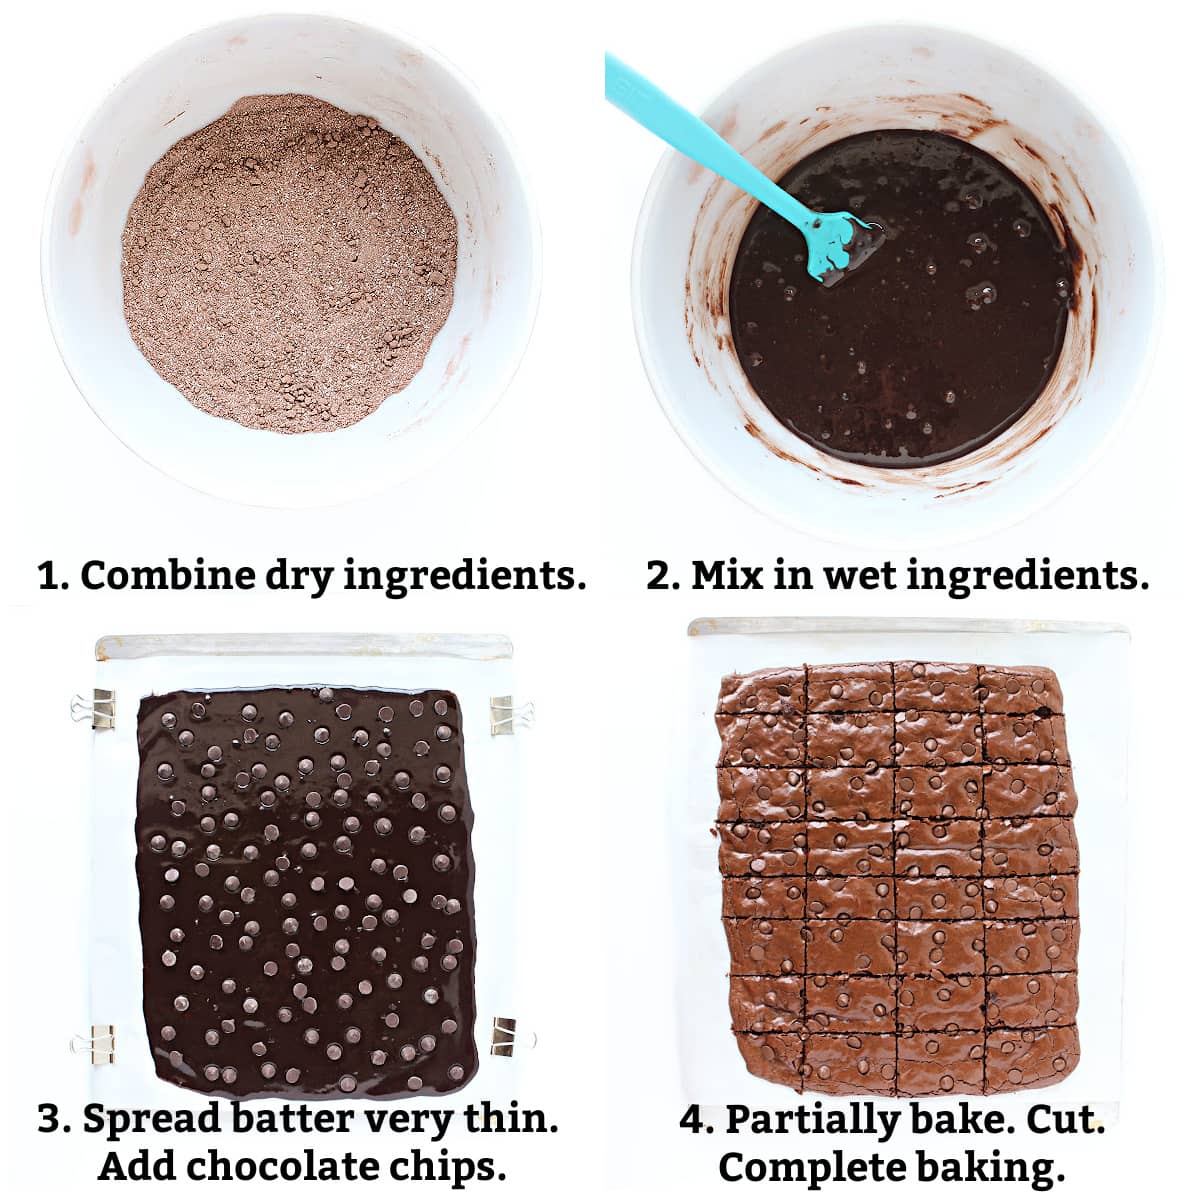 Instructions labeled: combine dry ingredients, add wet ingredients, spread on pan, bake, cut, bake again.